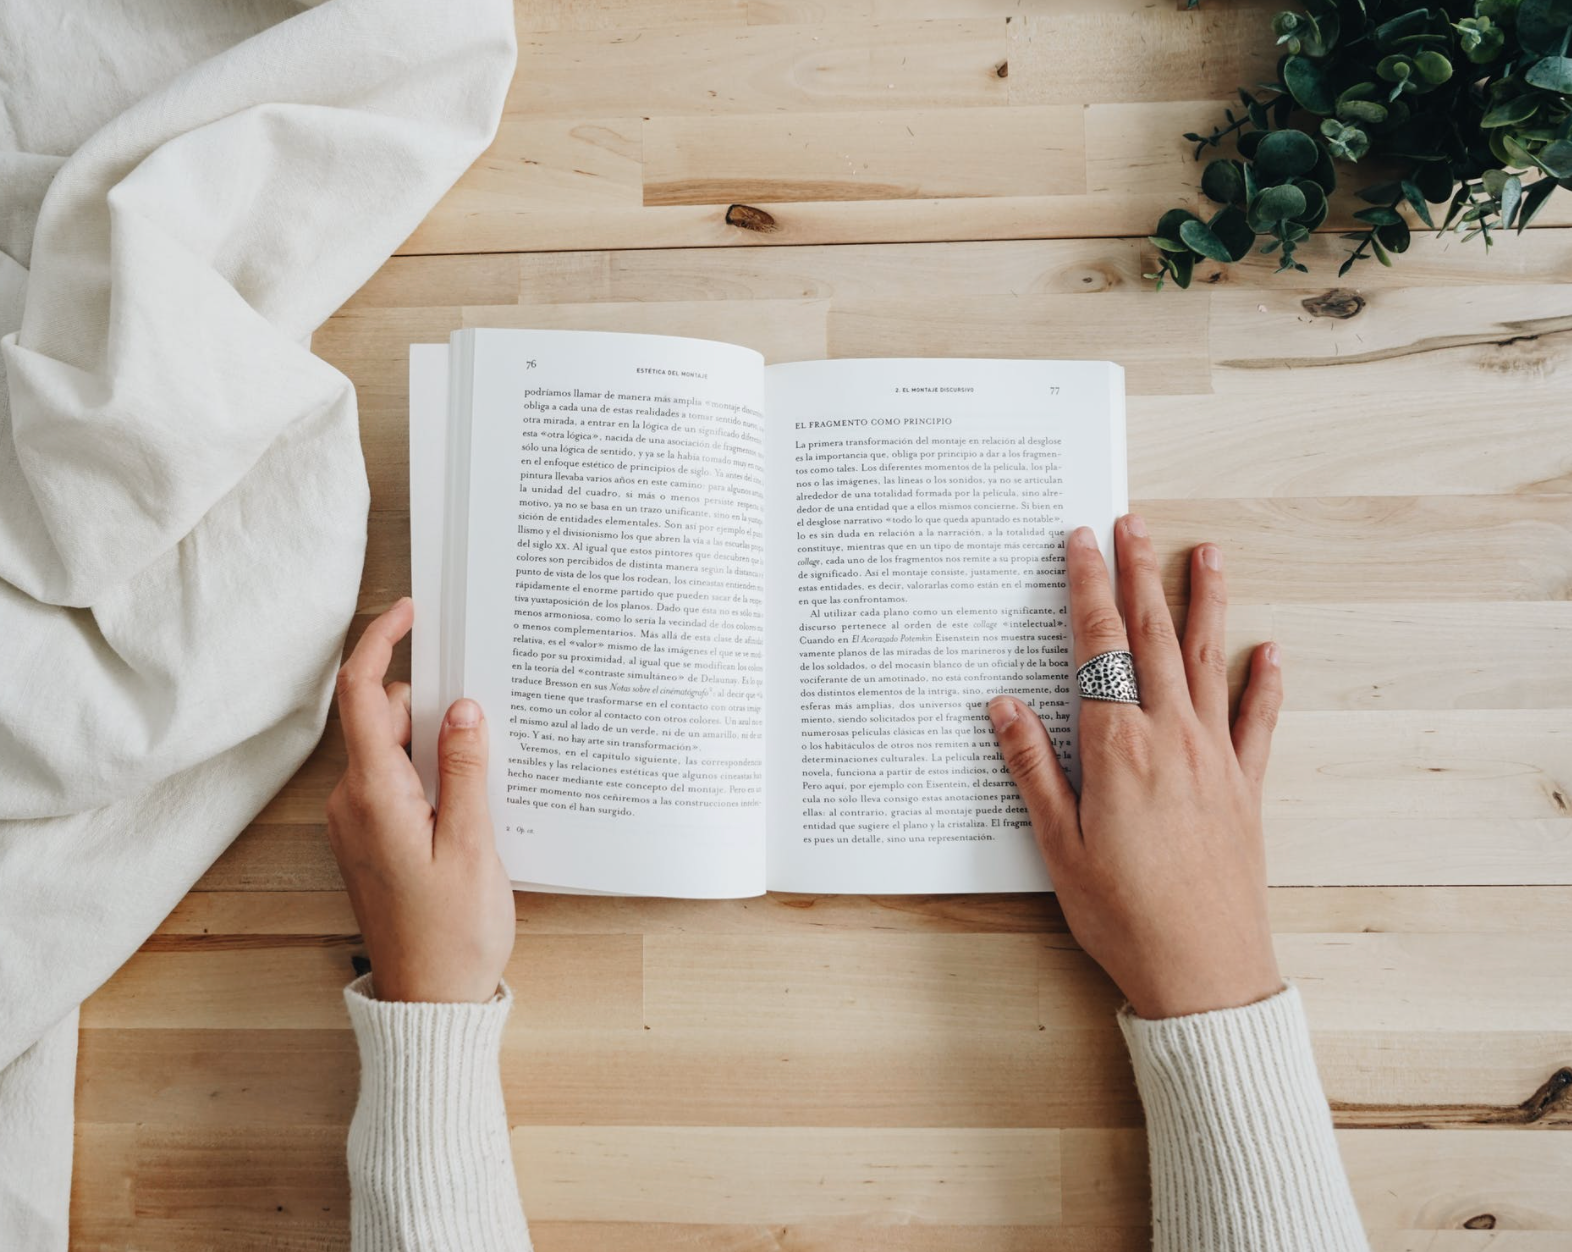 3 Self-Improvement Books to Add to Your Reading List